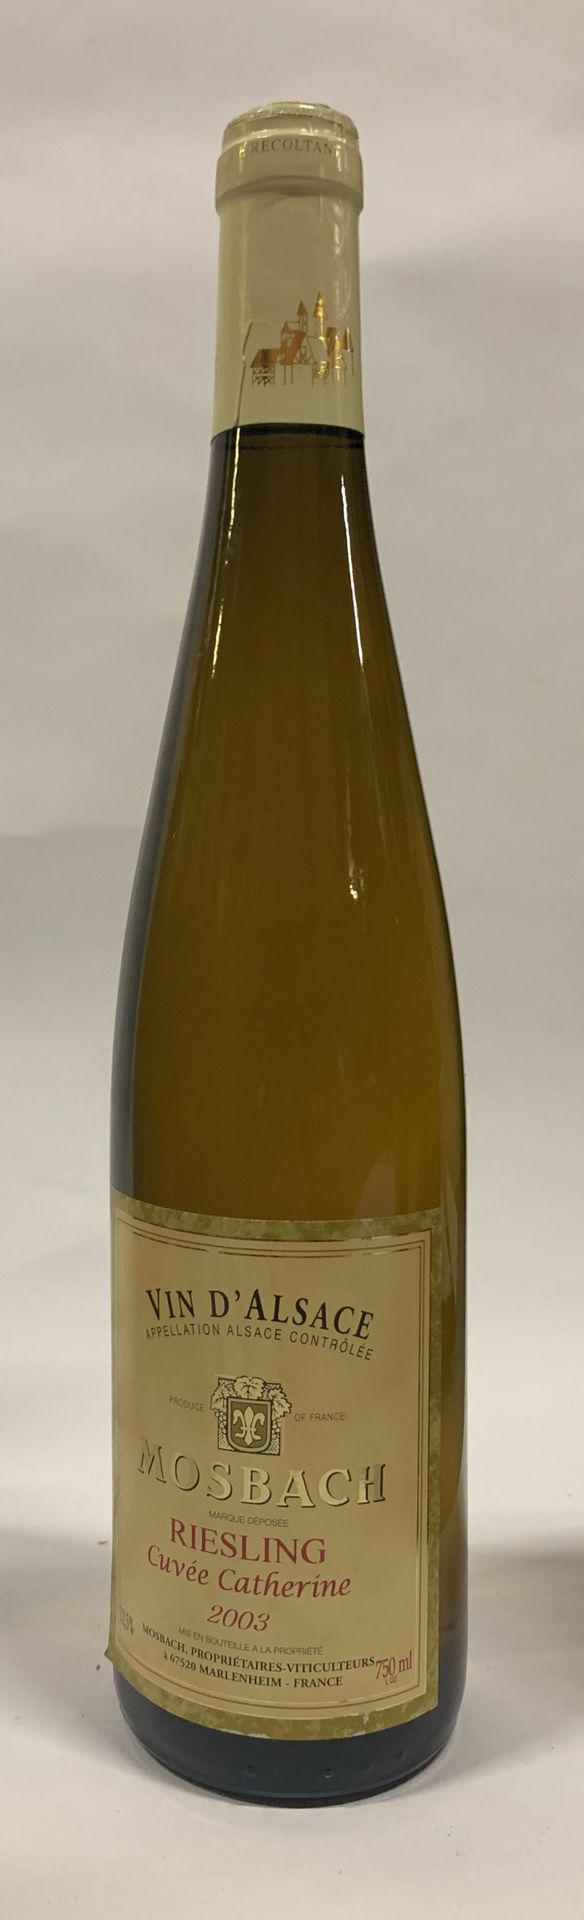 Null ○ RIESLING | Domaine Mosbach, 2003

2 bouteilles "Cuvée Catherine" (EA)

1 &hellip;